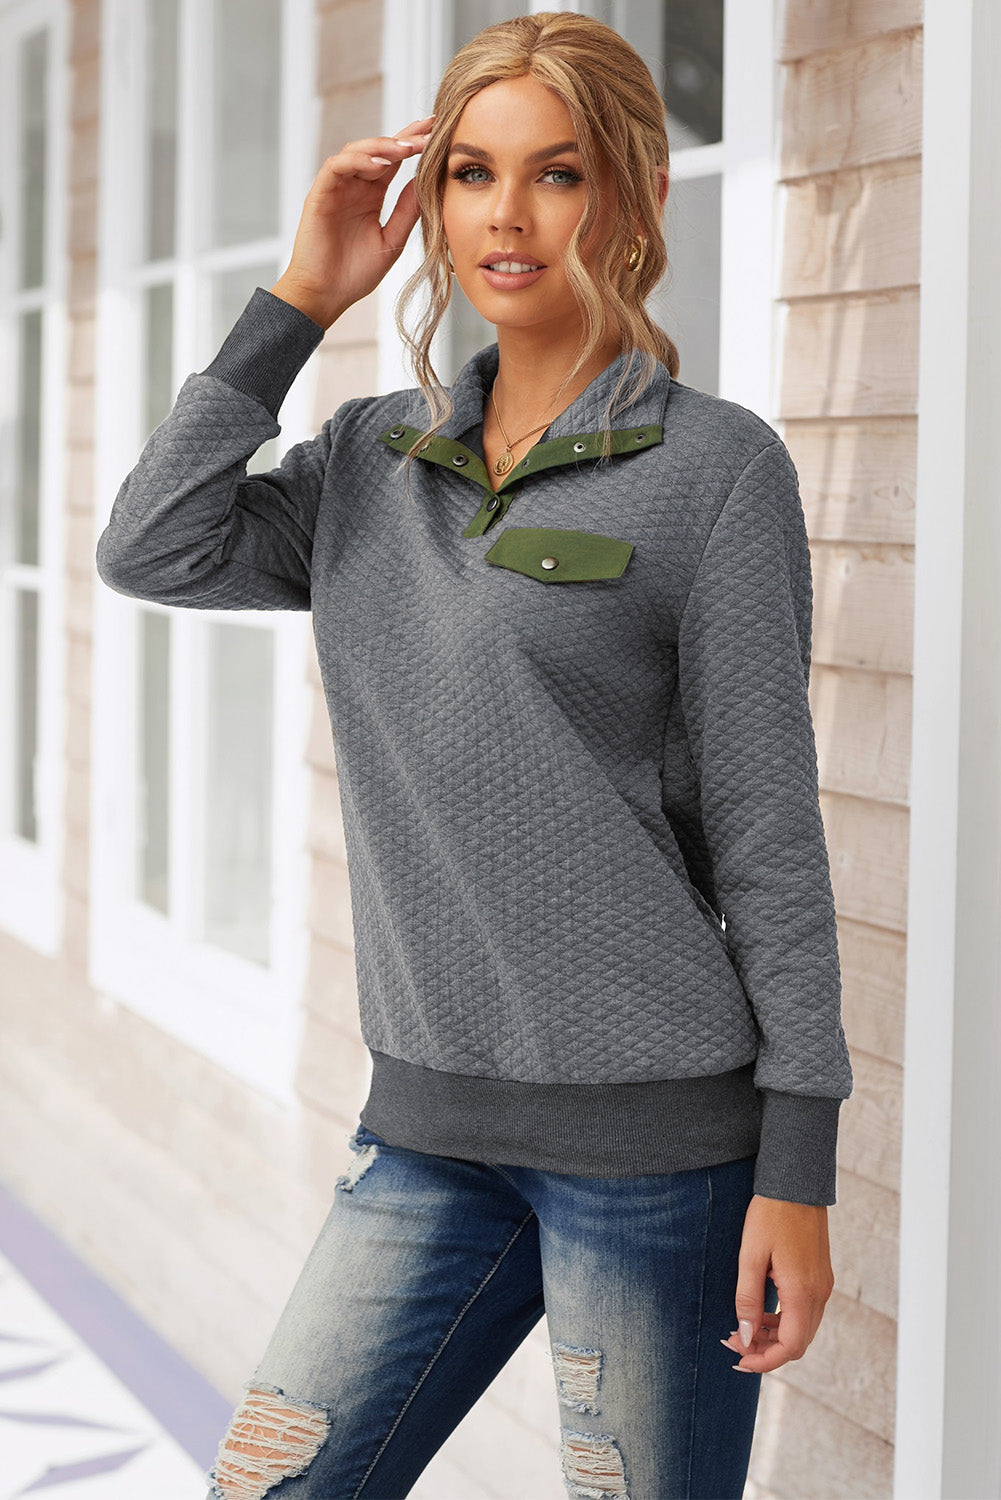 Collared Neck Long Sleeve Top - Women’s Clothing & Accessories - Shirts & Tops - 3 - 2024